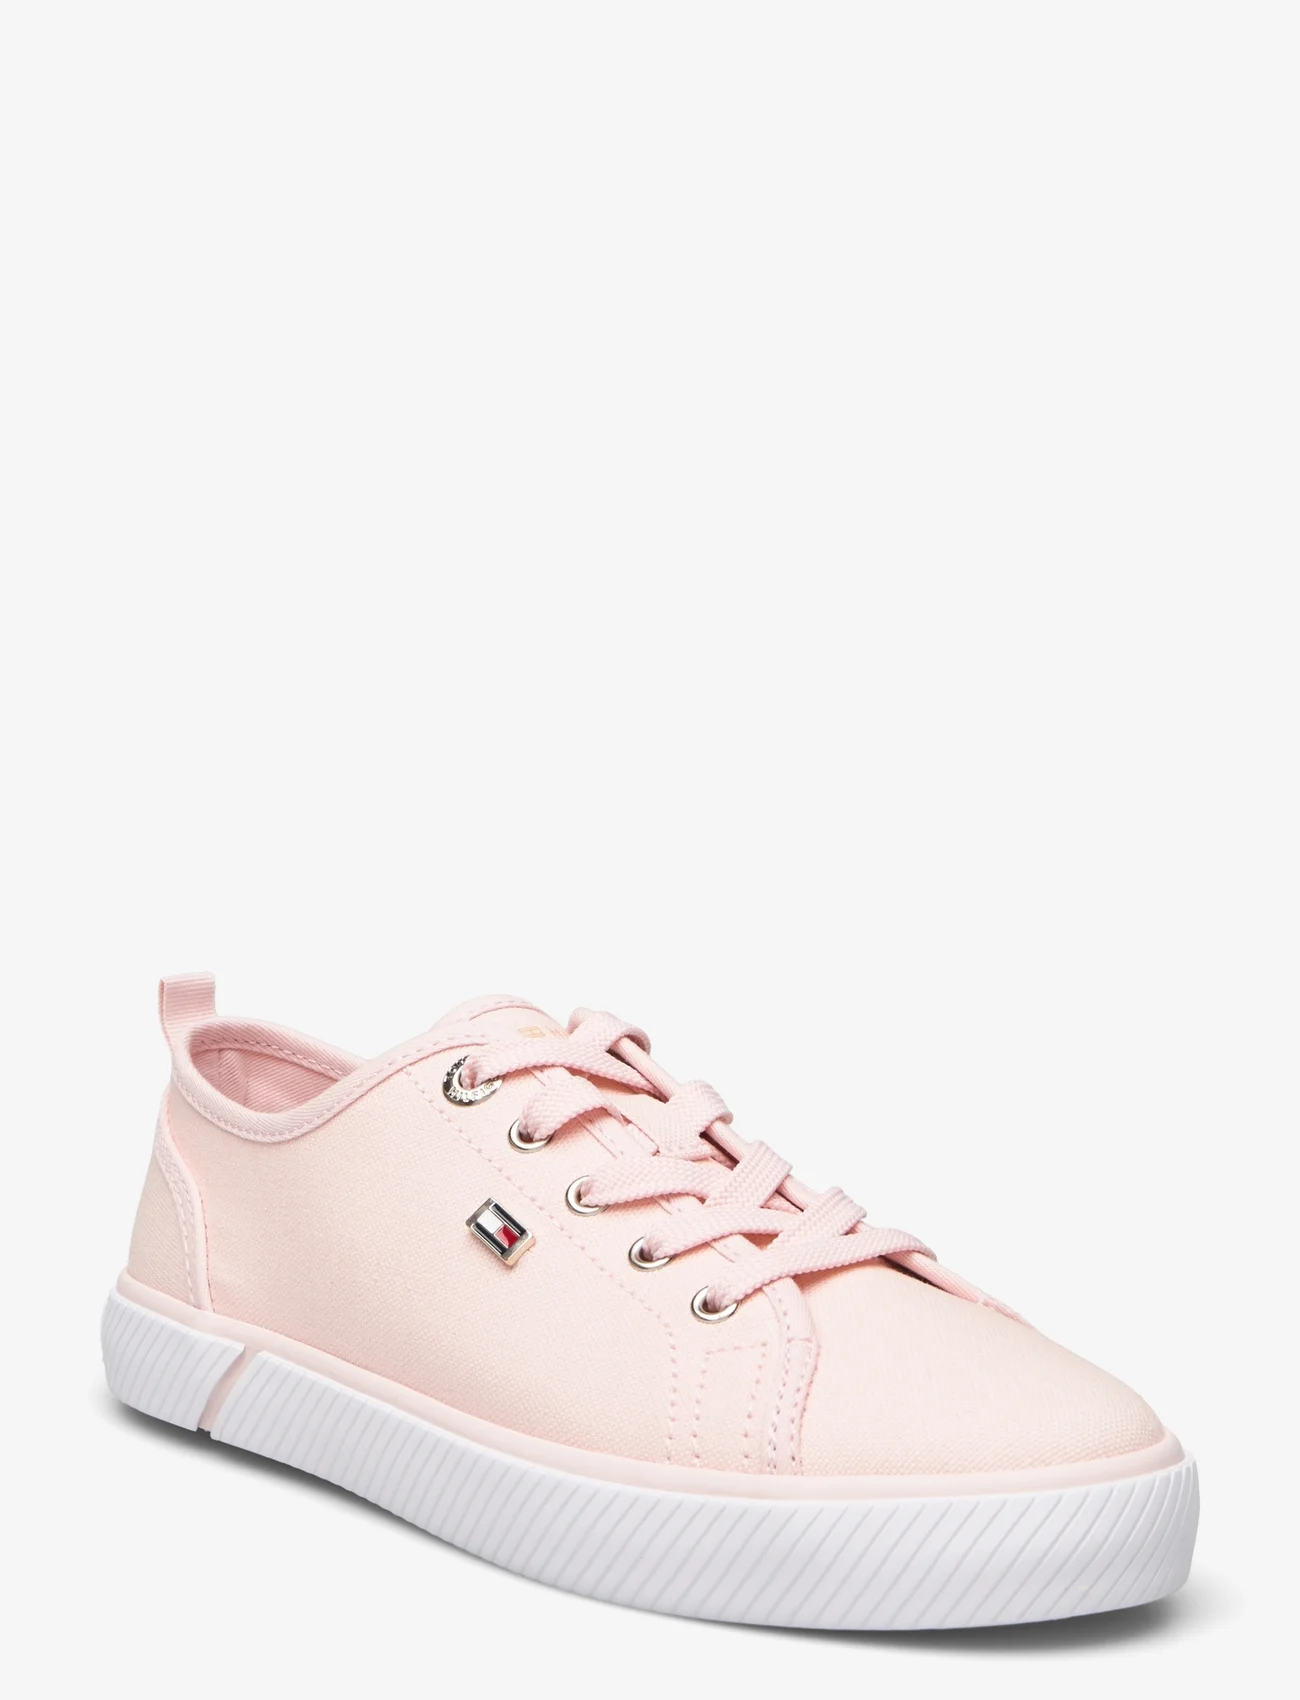 Tommy Hilfiger - VULC CANVAS SNEAKER - lave sneakers - whimsy pink - 0